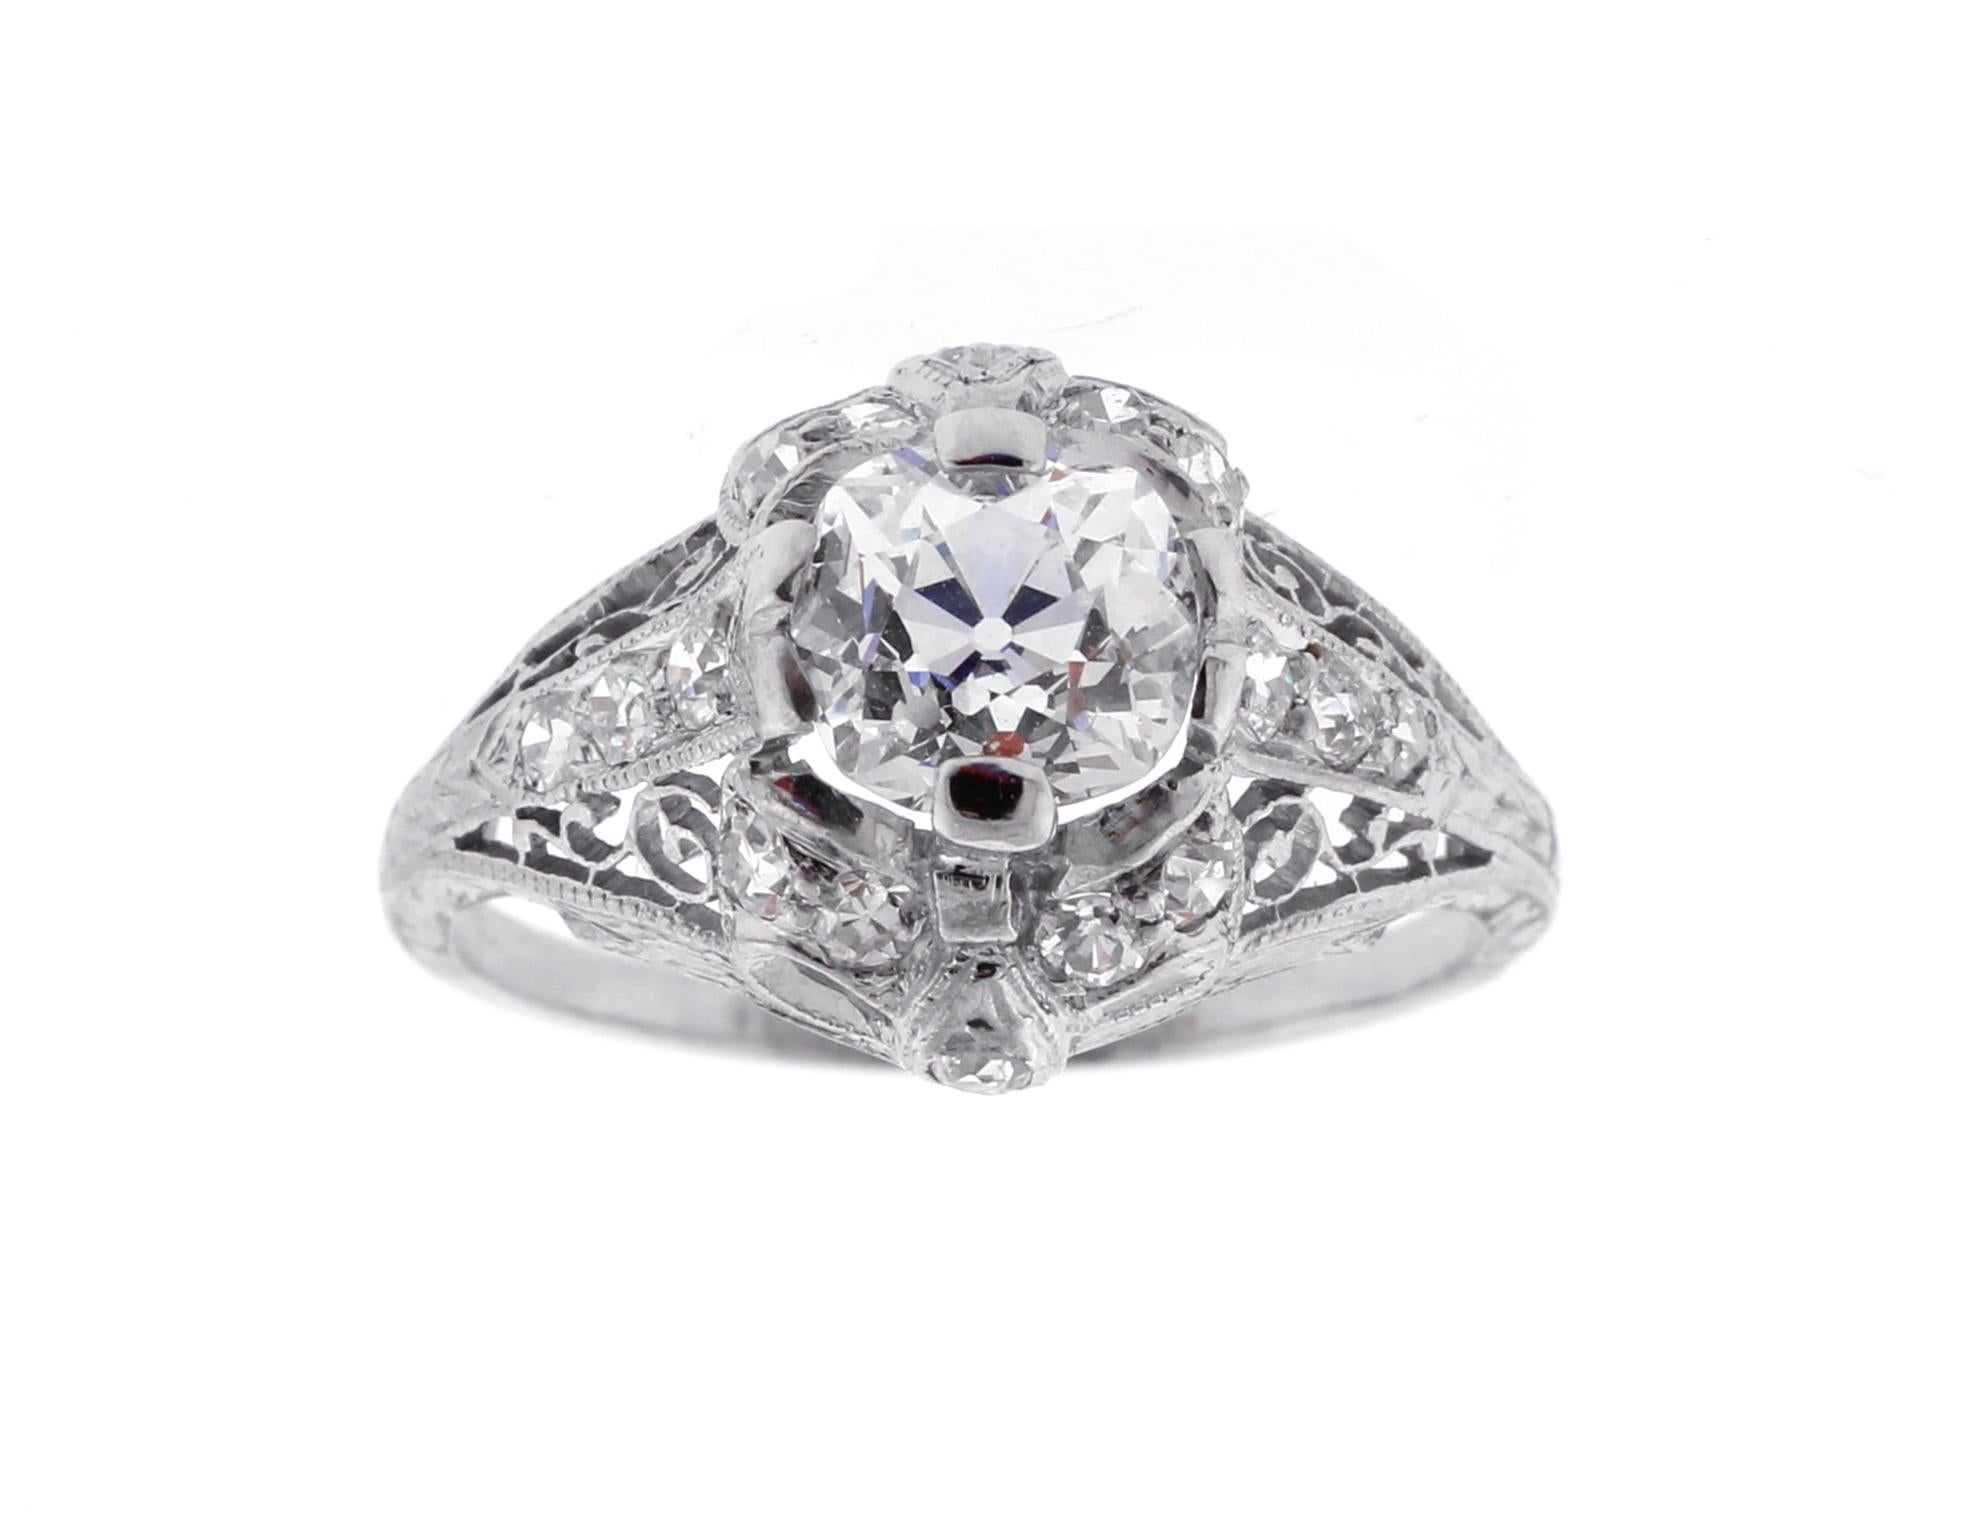 From Edwardian period and antique diamond engagement ring featuring a 1.14 carat Old mine cut diamond
♦ Metal: Platinum
♦ Old Mine cut diamond=1.14 carats  J color, VS1 clarity GIA report
♦ 16 Diamonds=.35
♦ Circa 1920s
♦ Size 6, Resizable
♦